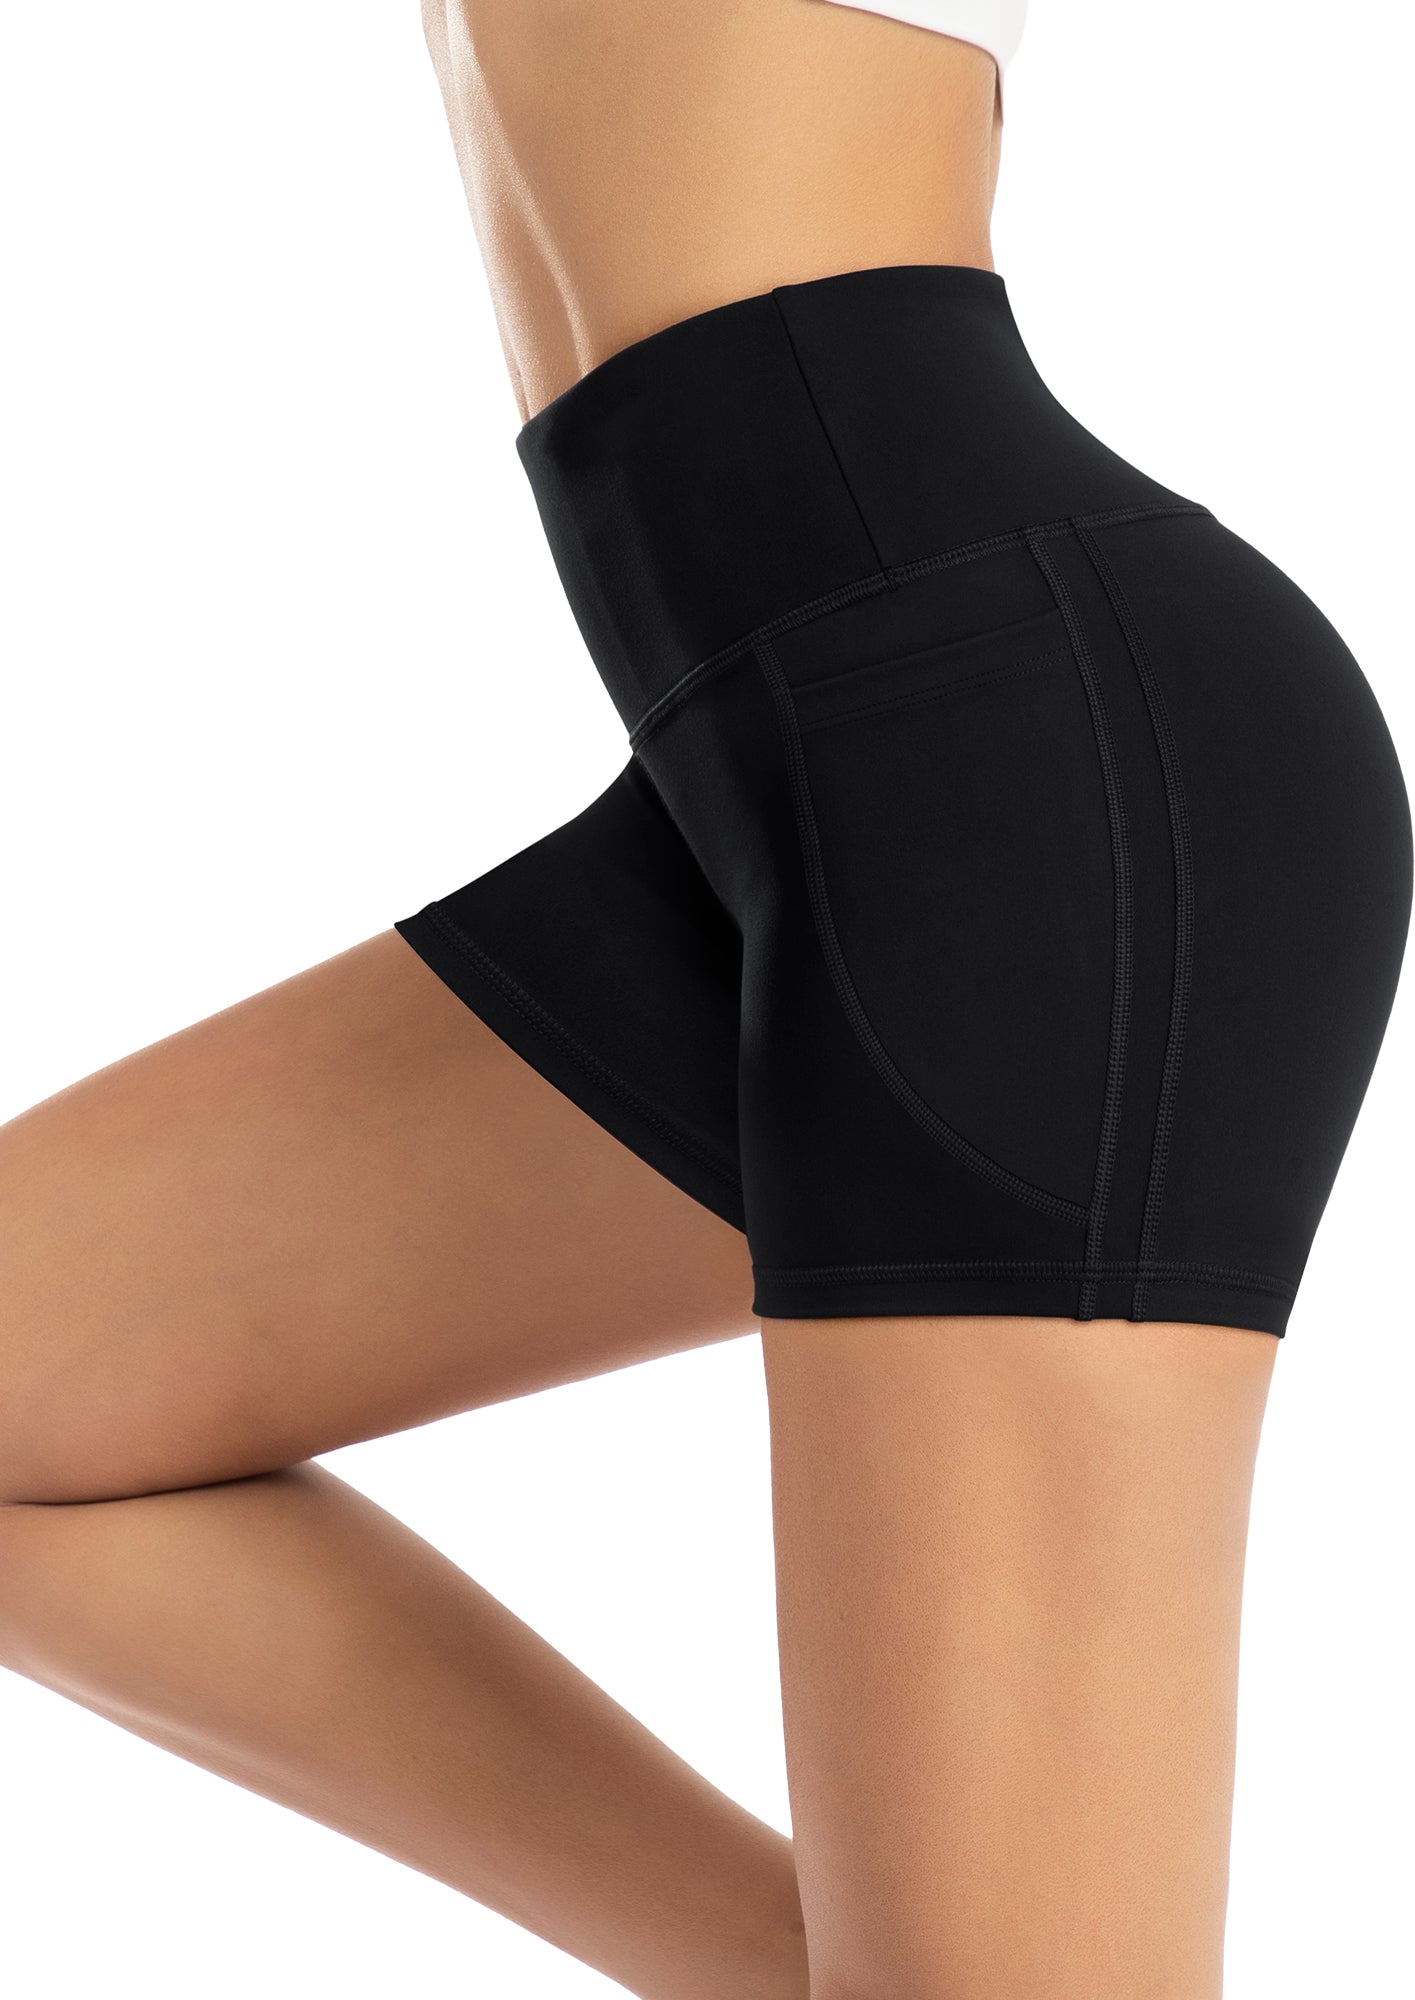 GOFIEP Biker Shorts for Women - Gym Yoga Workout Running Spandex High Waisted Athletic Volleyball Shorts with Pockets